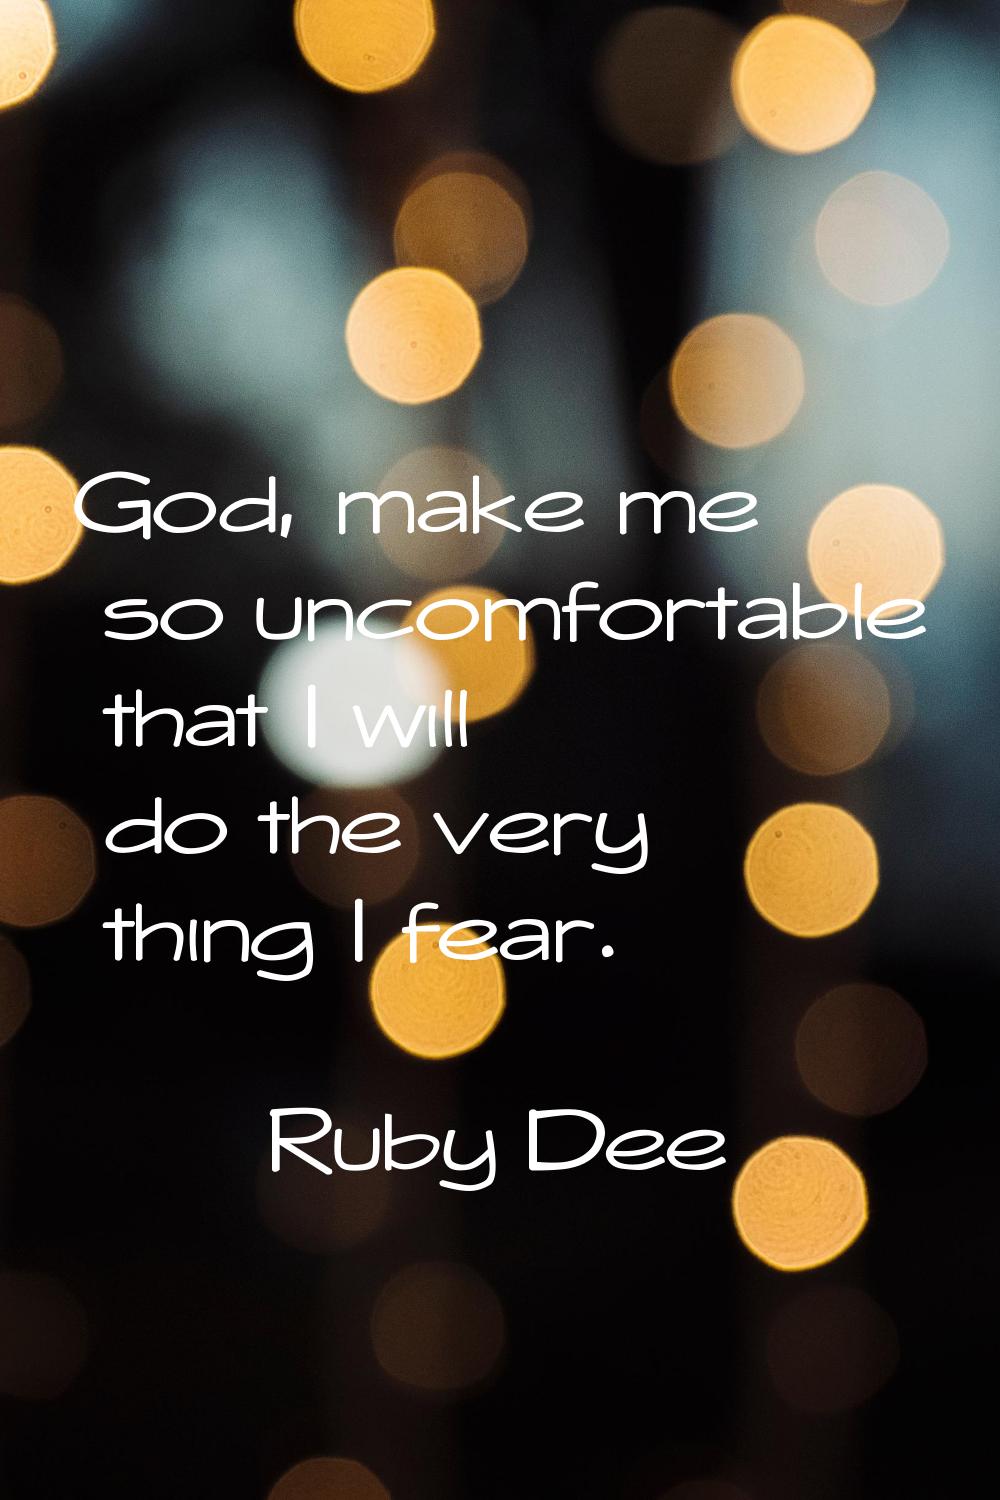 God, make me so uncomfortable that I will do the very thing I fear.